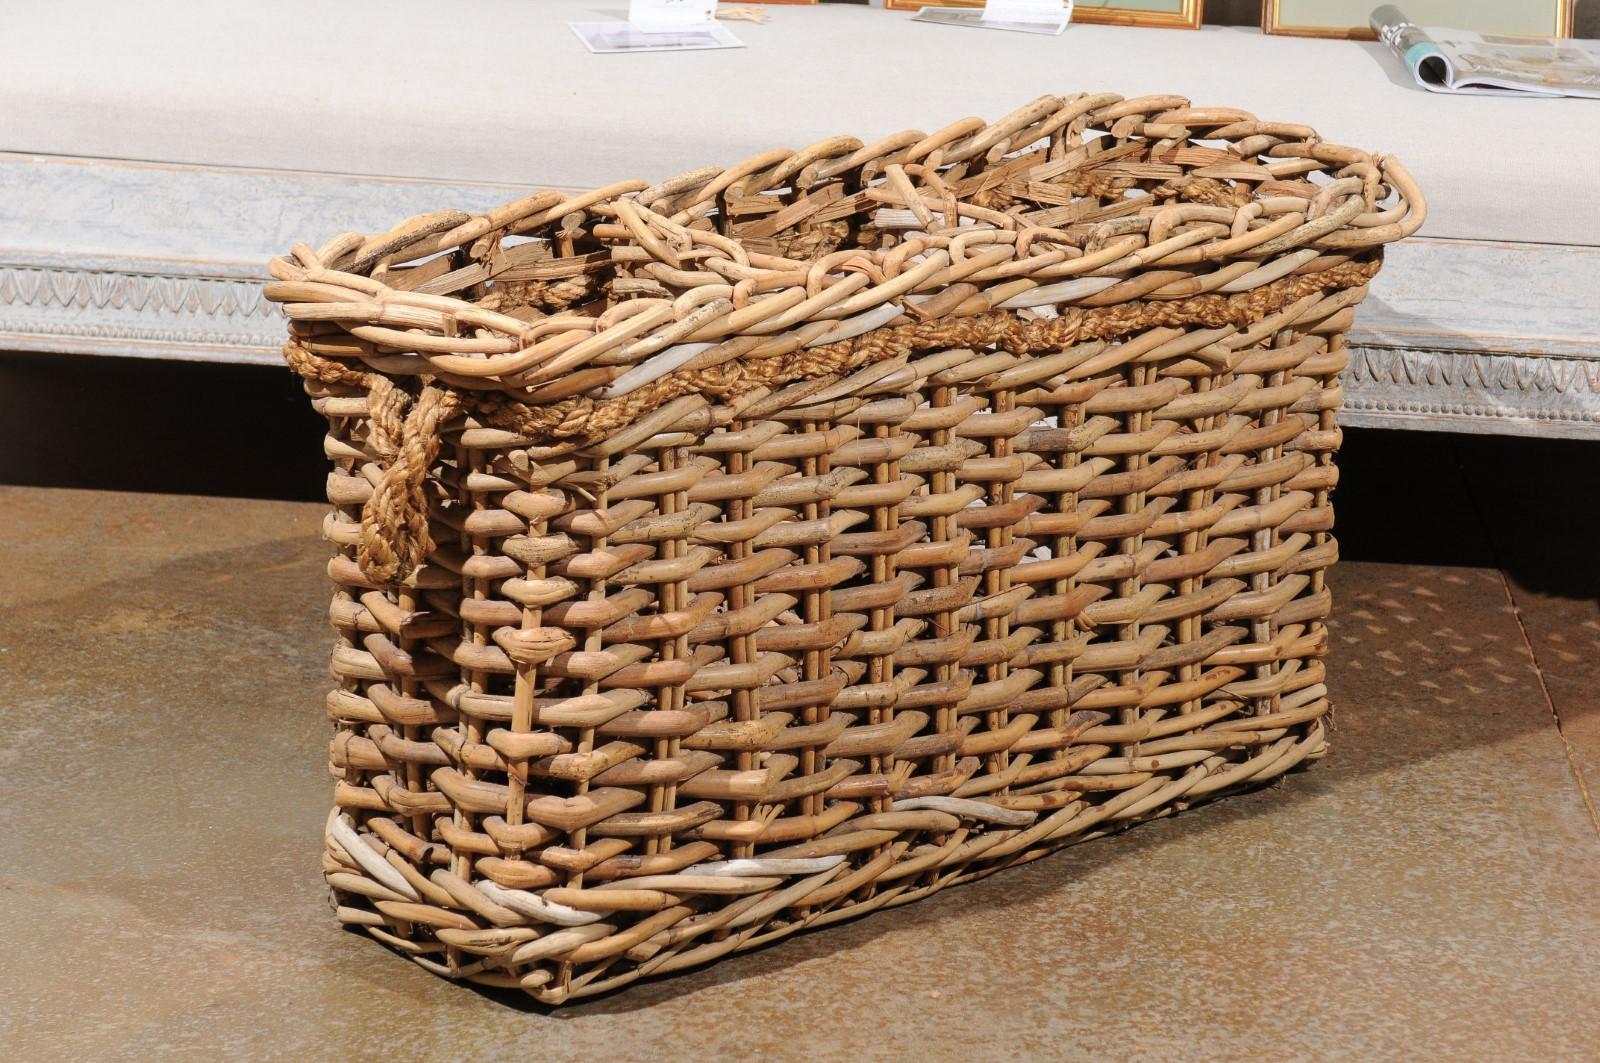 20th Century Rustic French Narrow Rectangular Partitioned Wicker Basket with Rope Handles